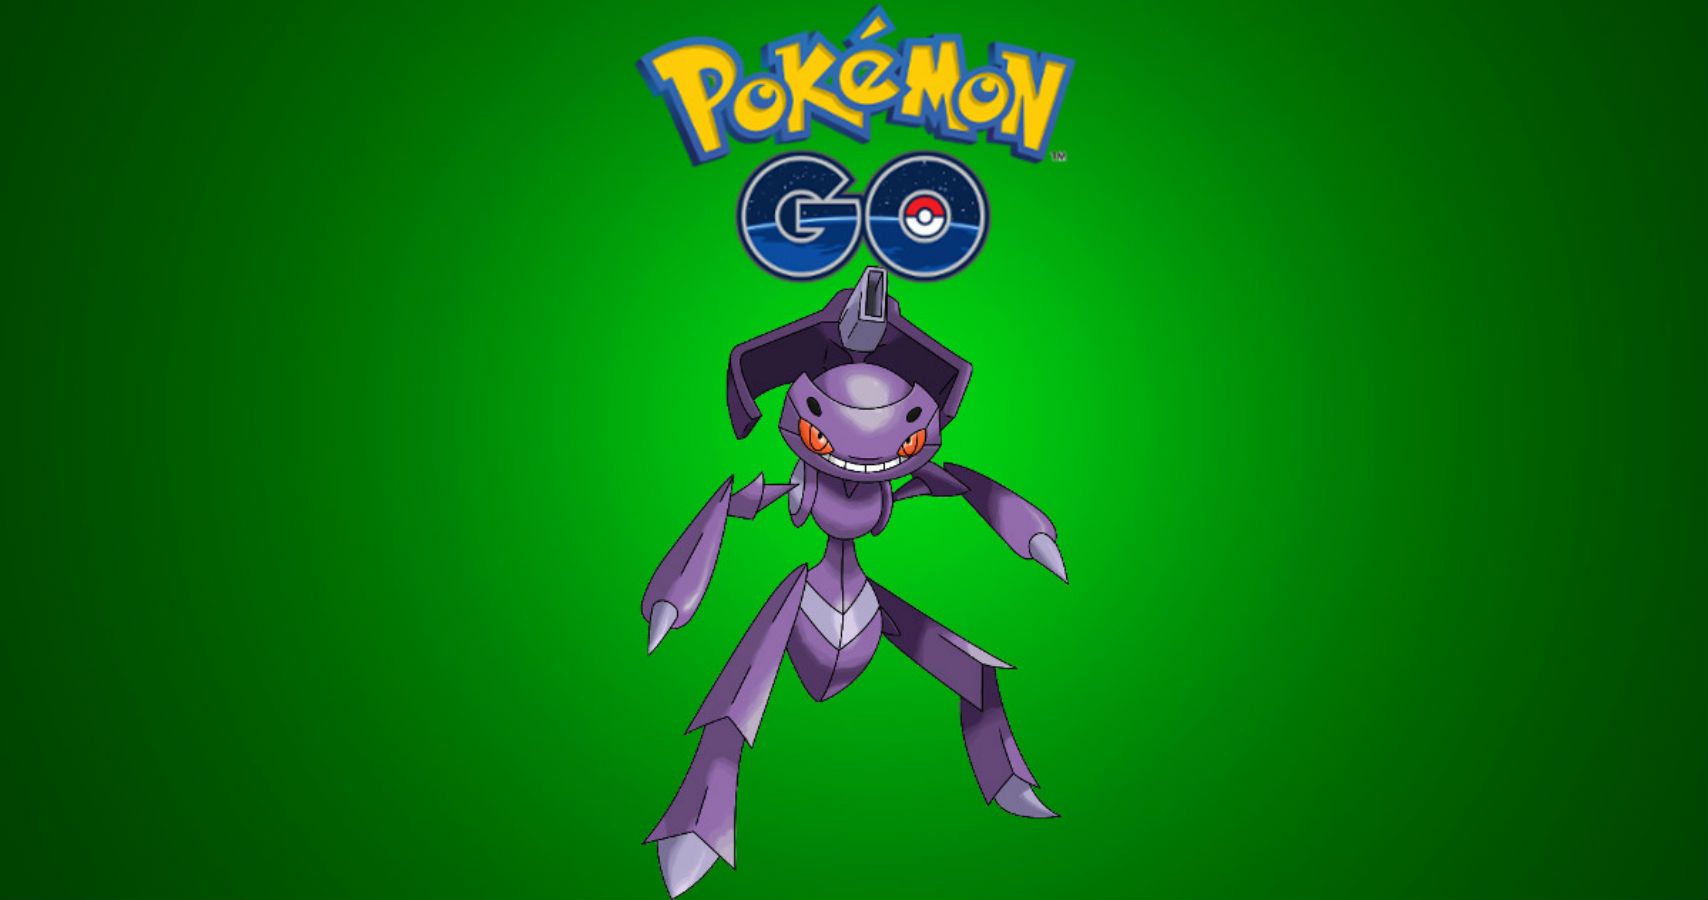 Genesect is coming to Pokémon GO in a new Special Research story